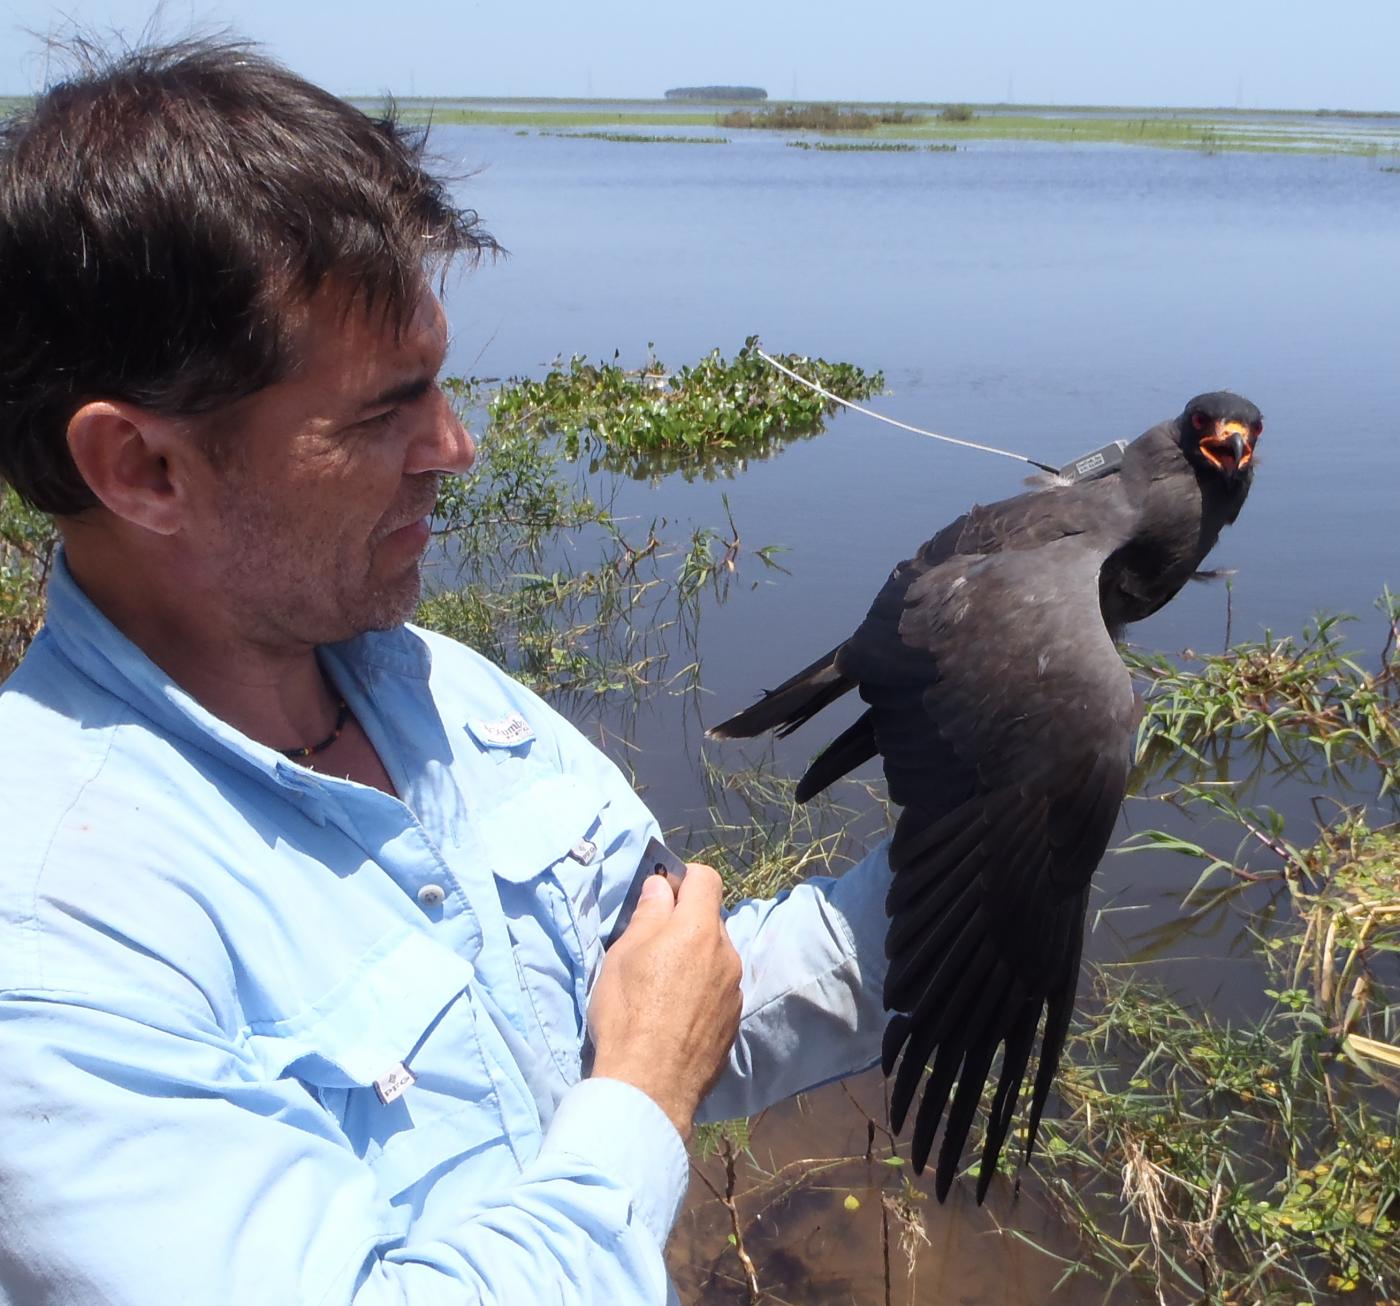 A Smithsonian Migratory Bird Center postdoctoral fellow gets ready to release a bird, called a snail kite, that is wearing a satellite tracking device.